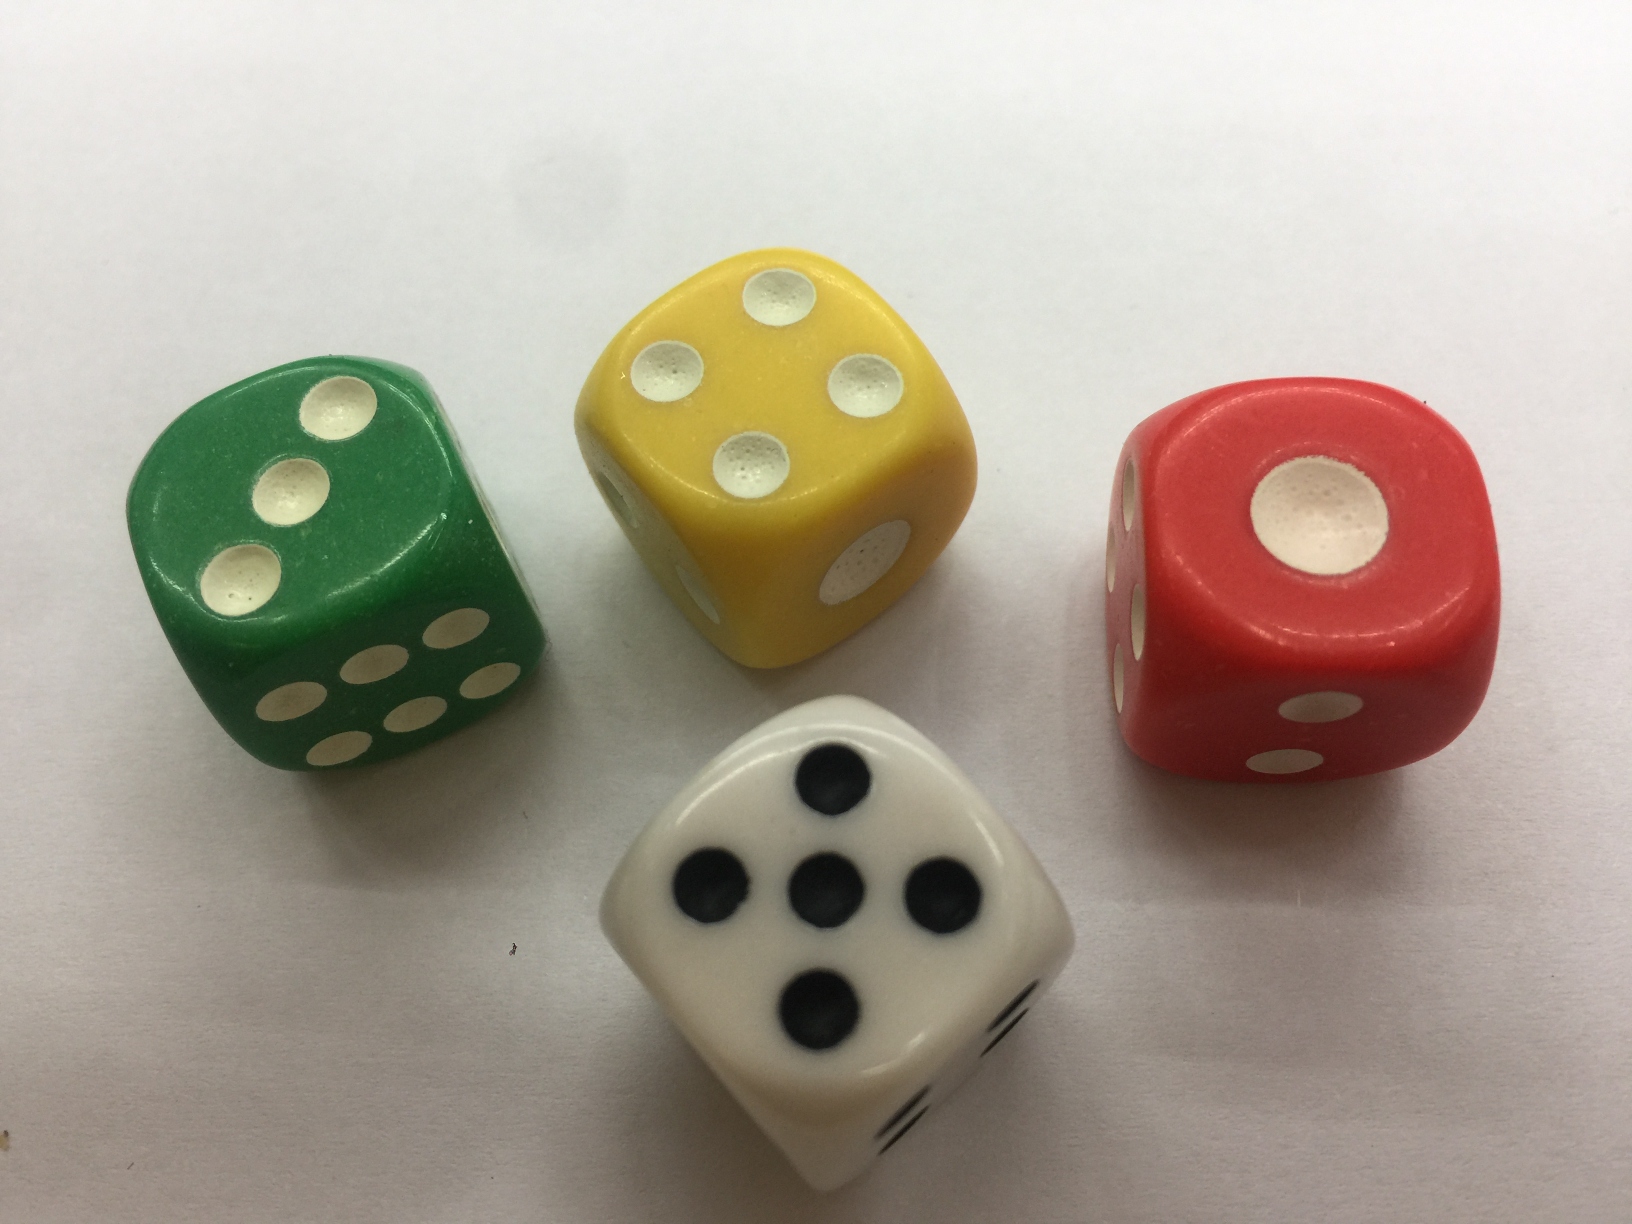 【Yiwu Haonan Sports】 Supply 14 # color dice a variety of colors